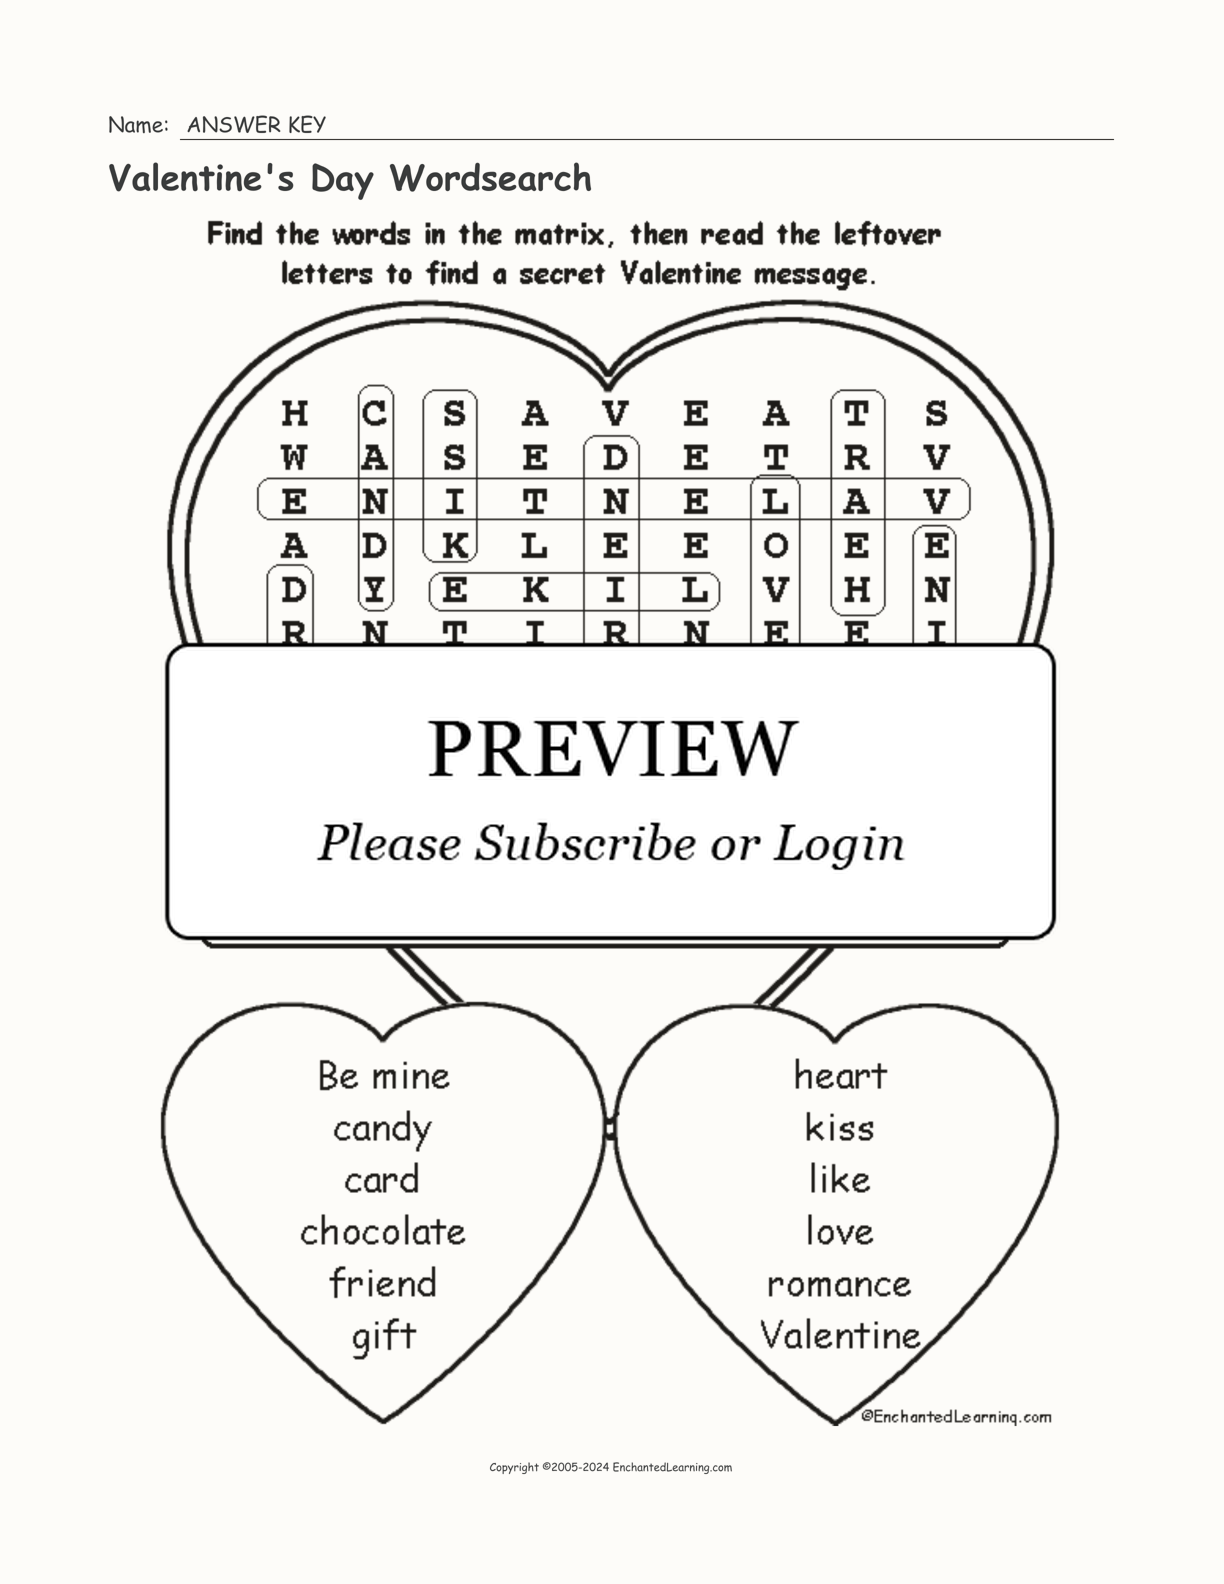 Valentine's Day Wordsearch interactive worksheet page 2